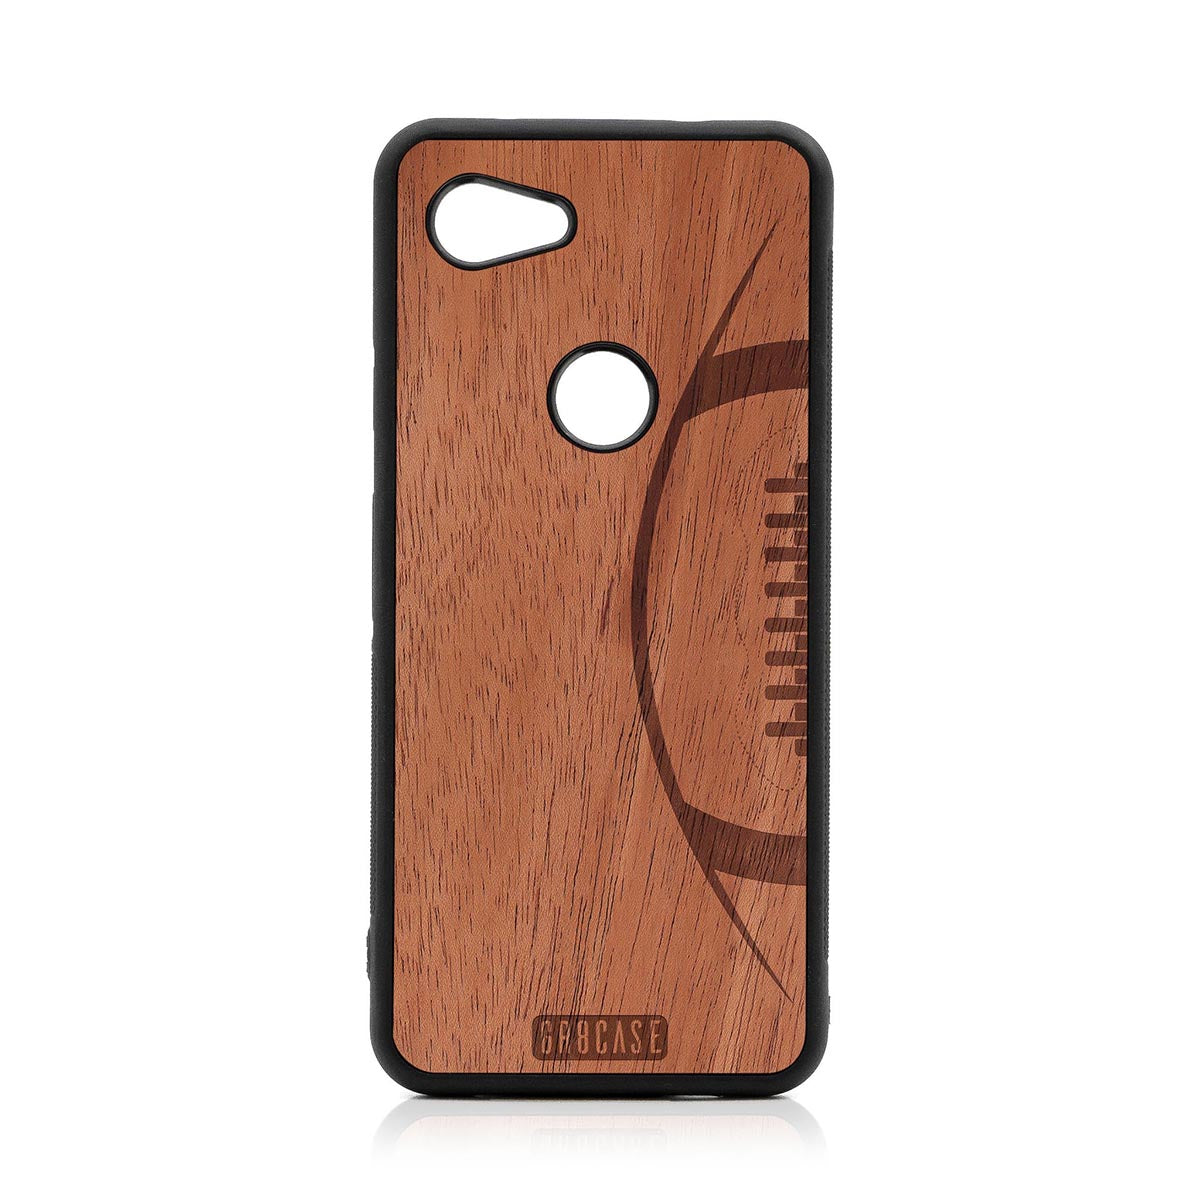 Football Design Wood Case For Google Pixel 3A XL by GR8CASE